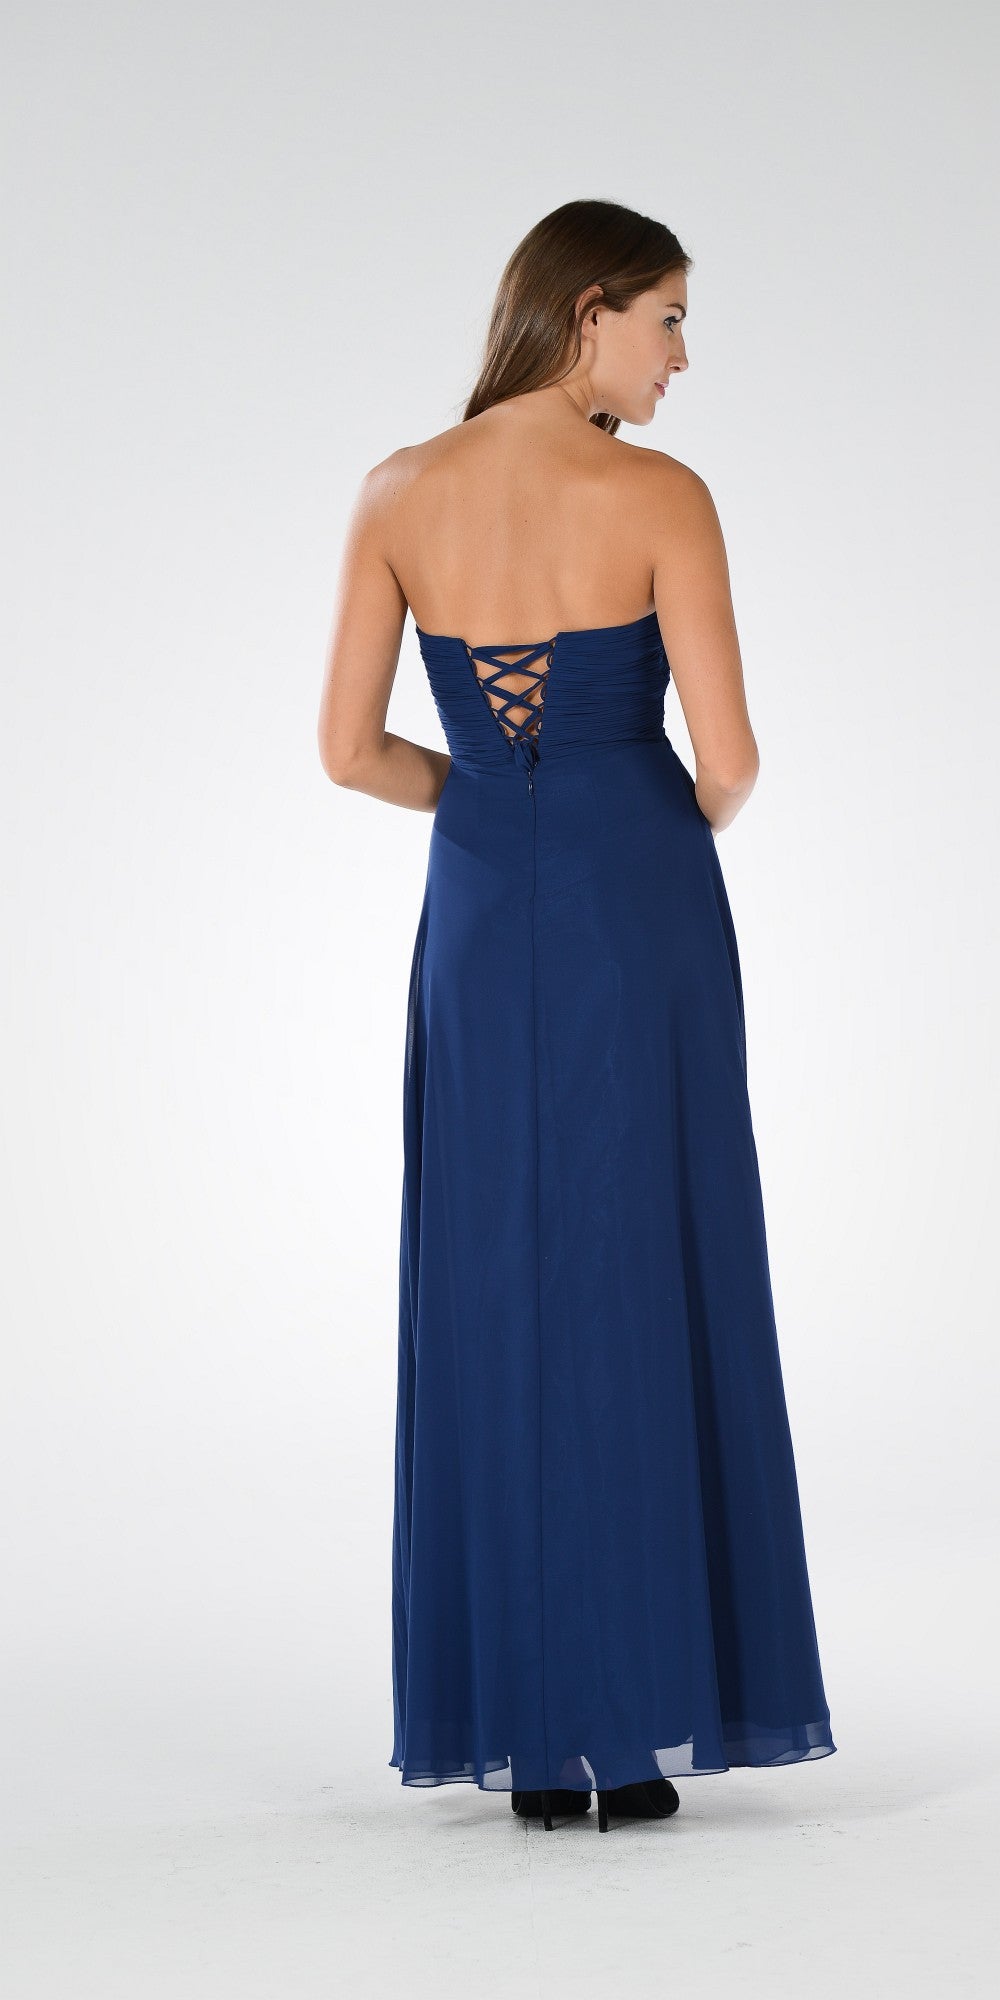 Sweetheart Strapless Ruched Bodice Lace Up Back Long Bridesmaids Dress Navy Blue